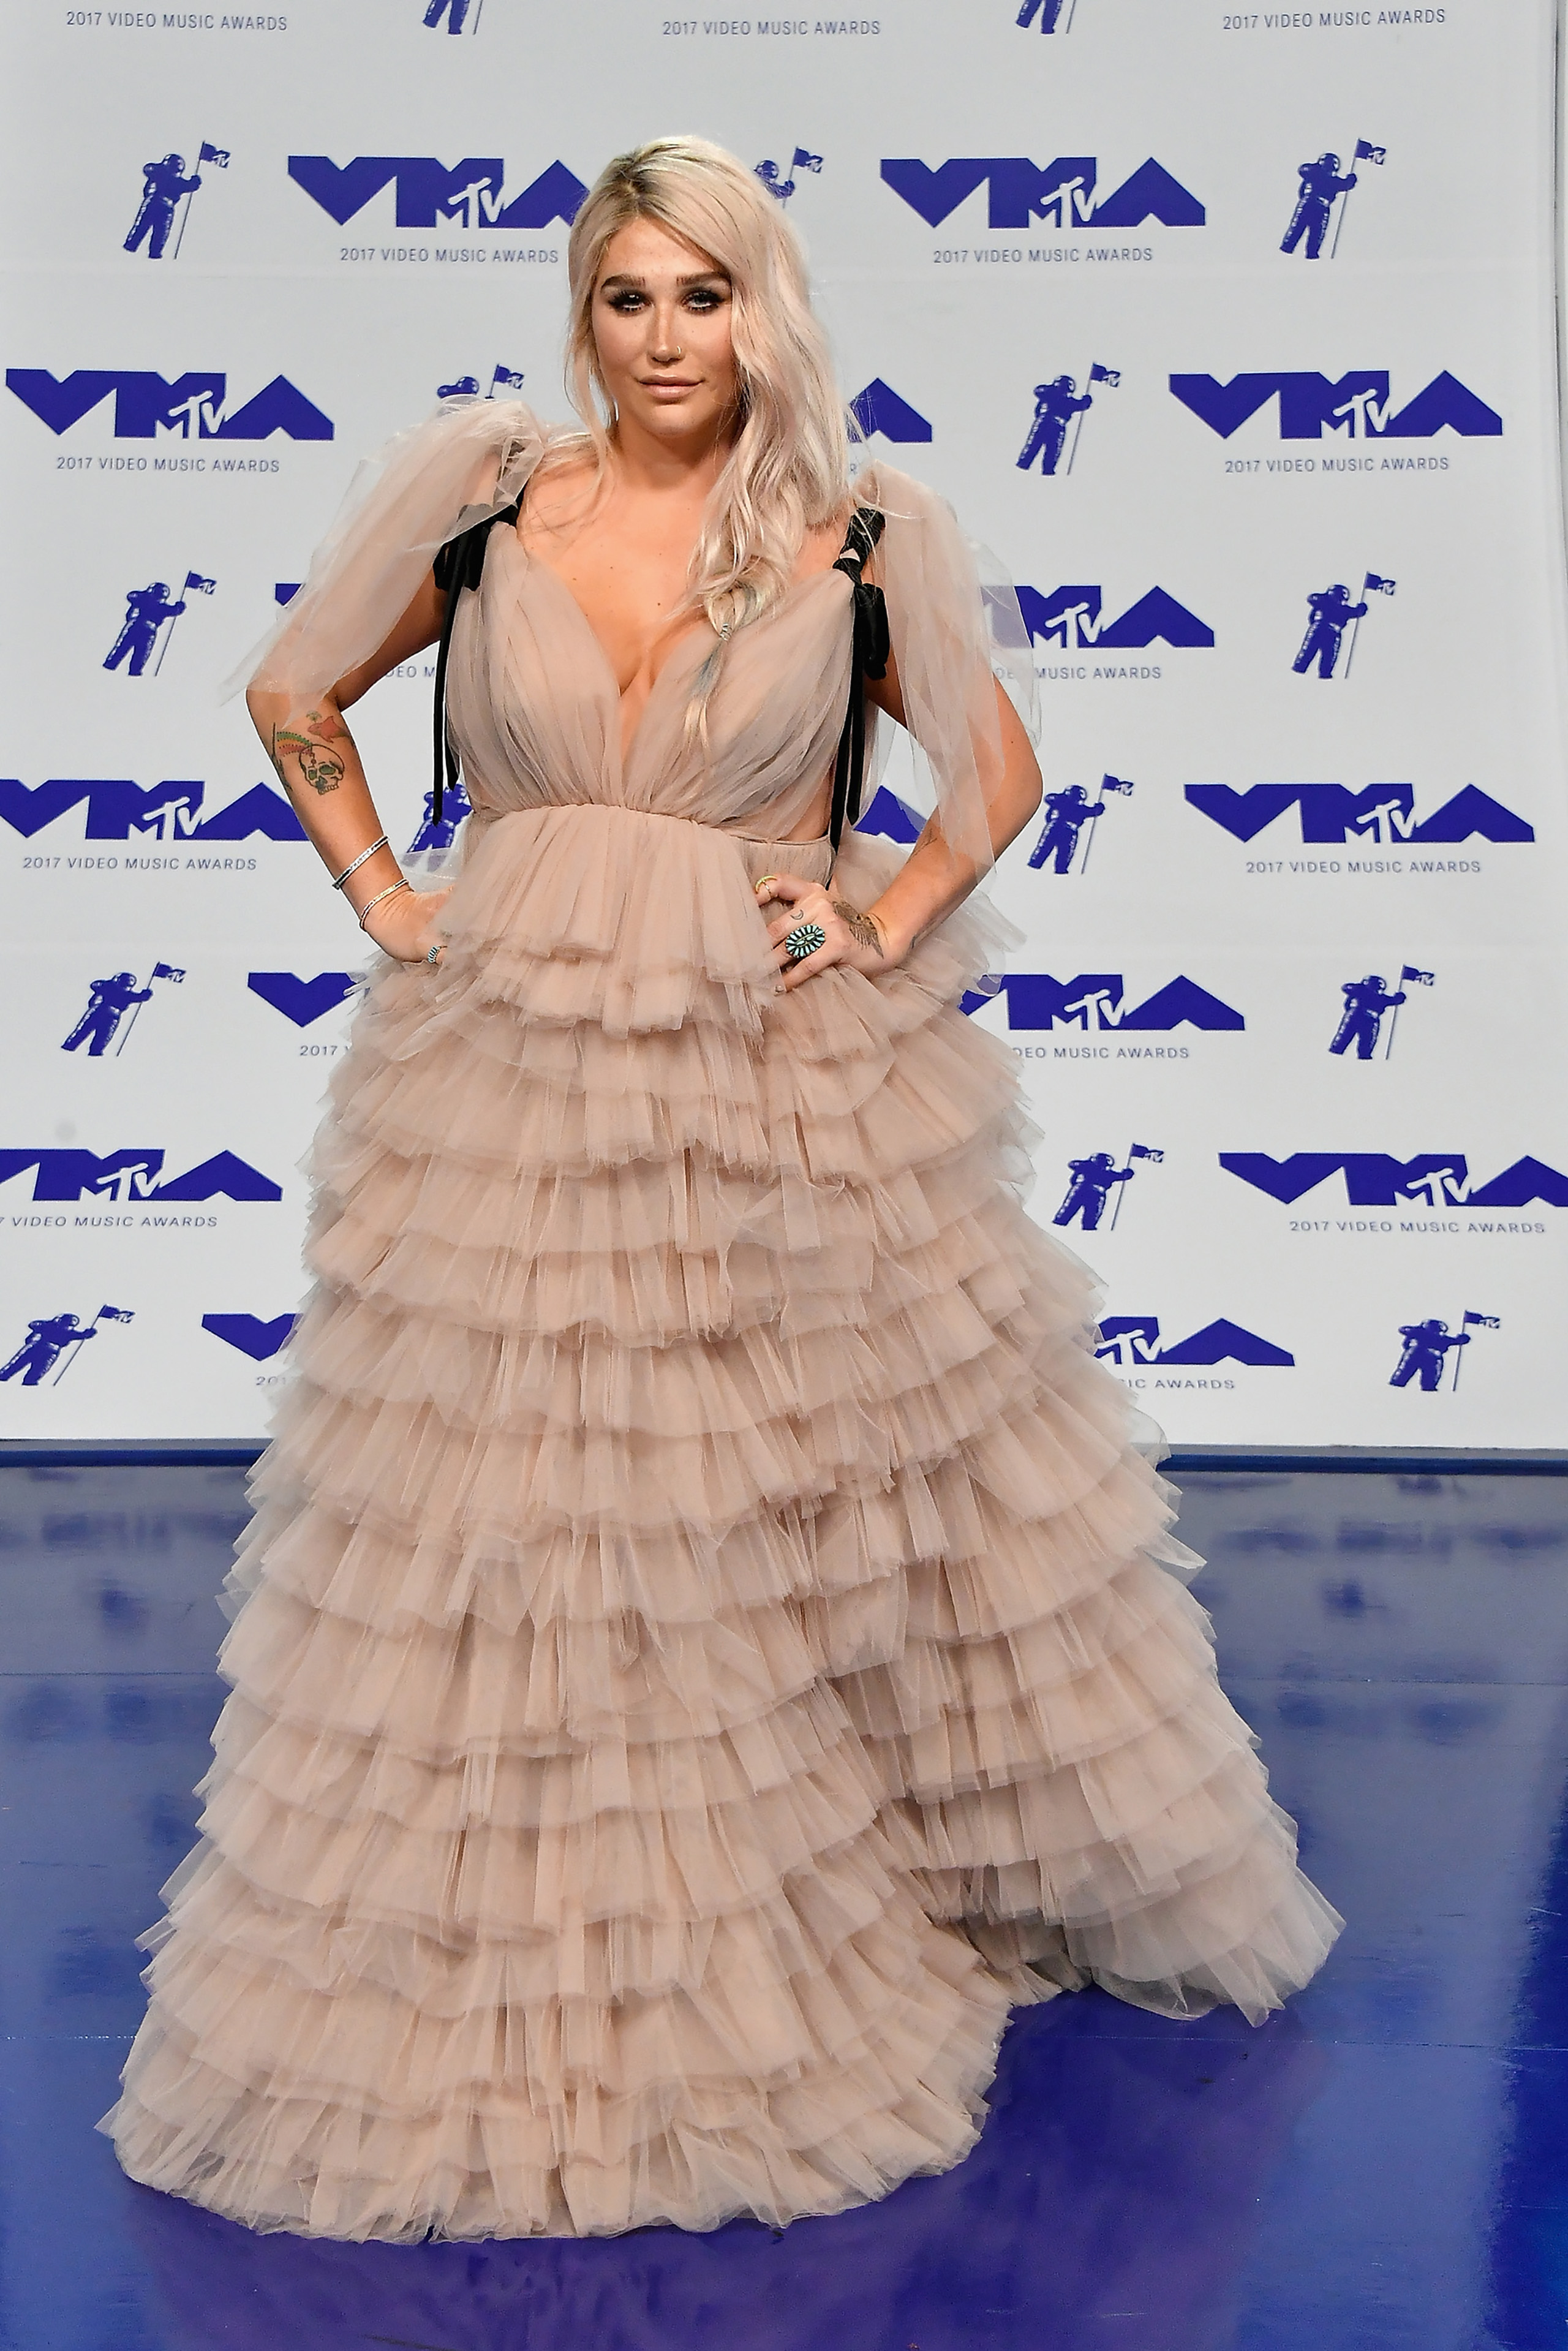 Singer-songwriter Kesha attends the 2017 MTV Video Music Awards at The Forum on August 27, 2017 in Inglewood, California.